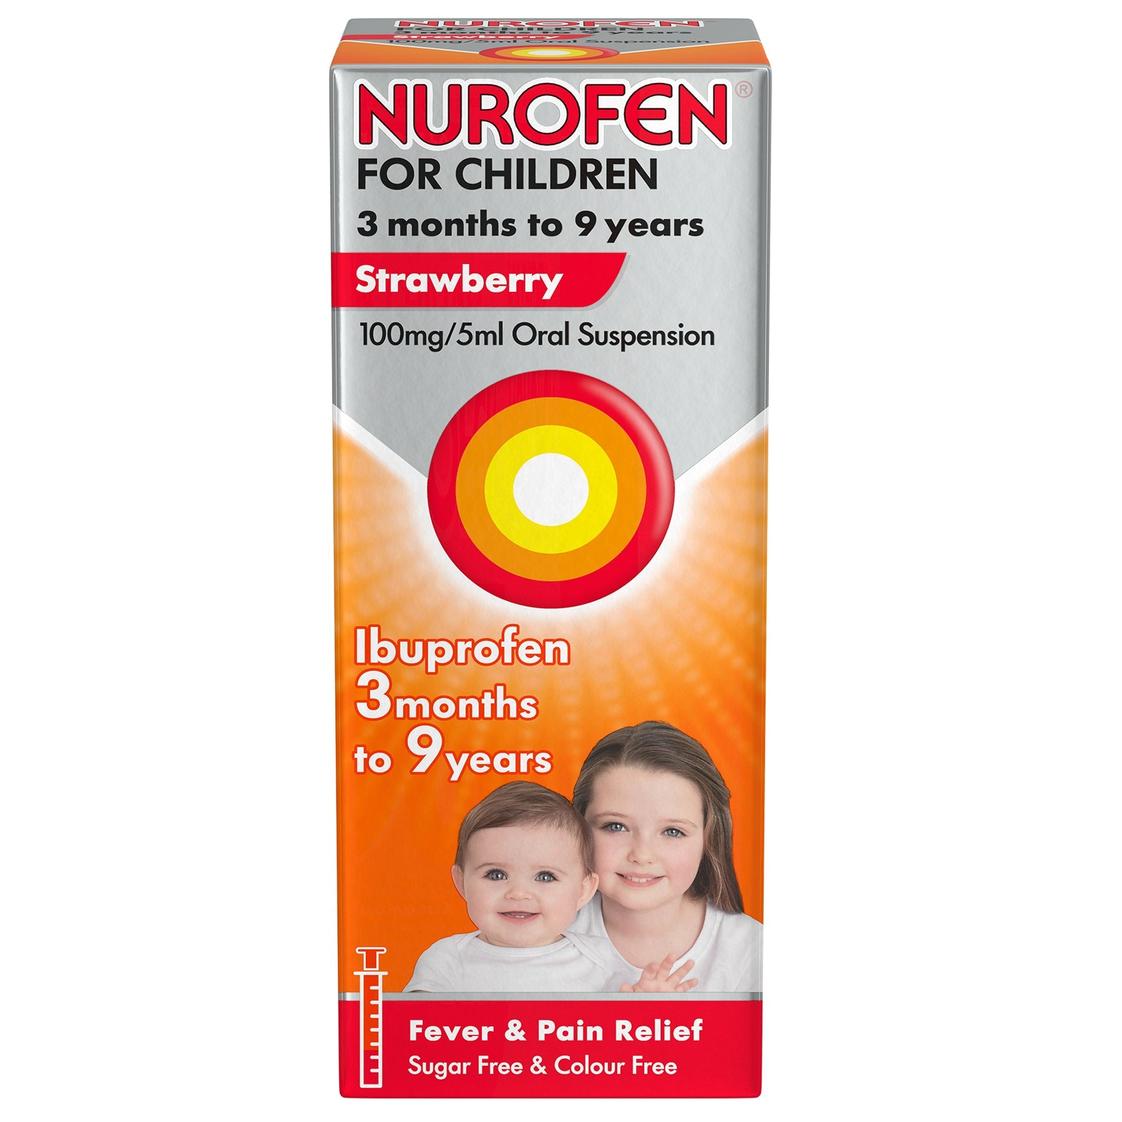 Nurofen for children strawberry offers at £399 in Lloyds Pharmacy